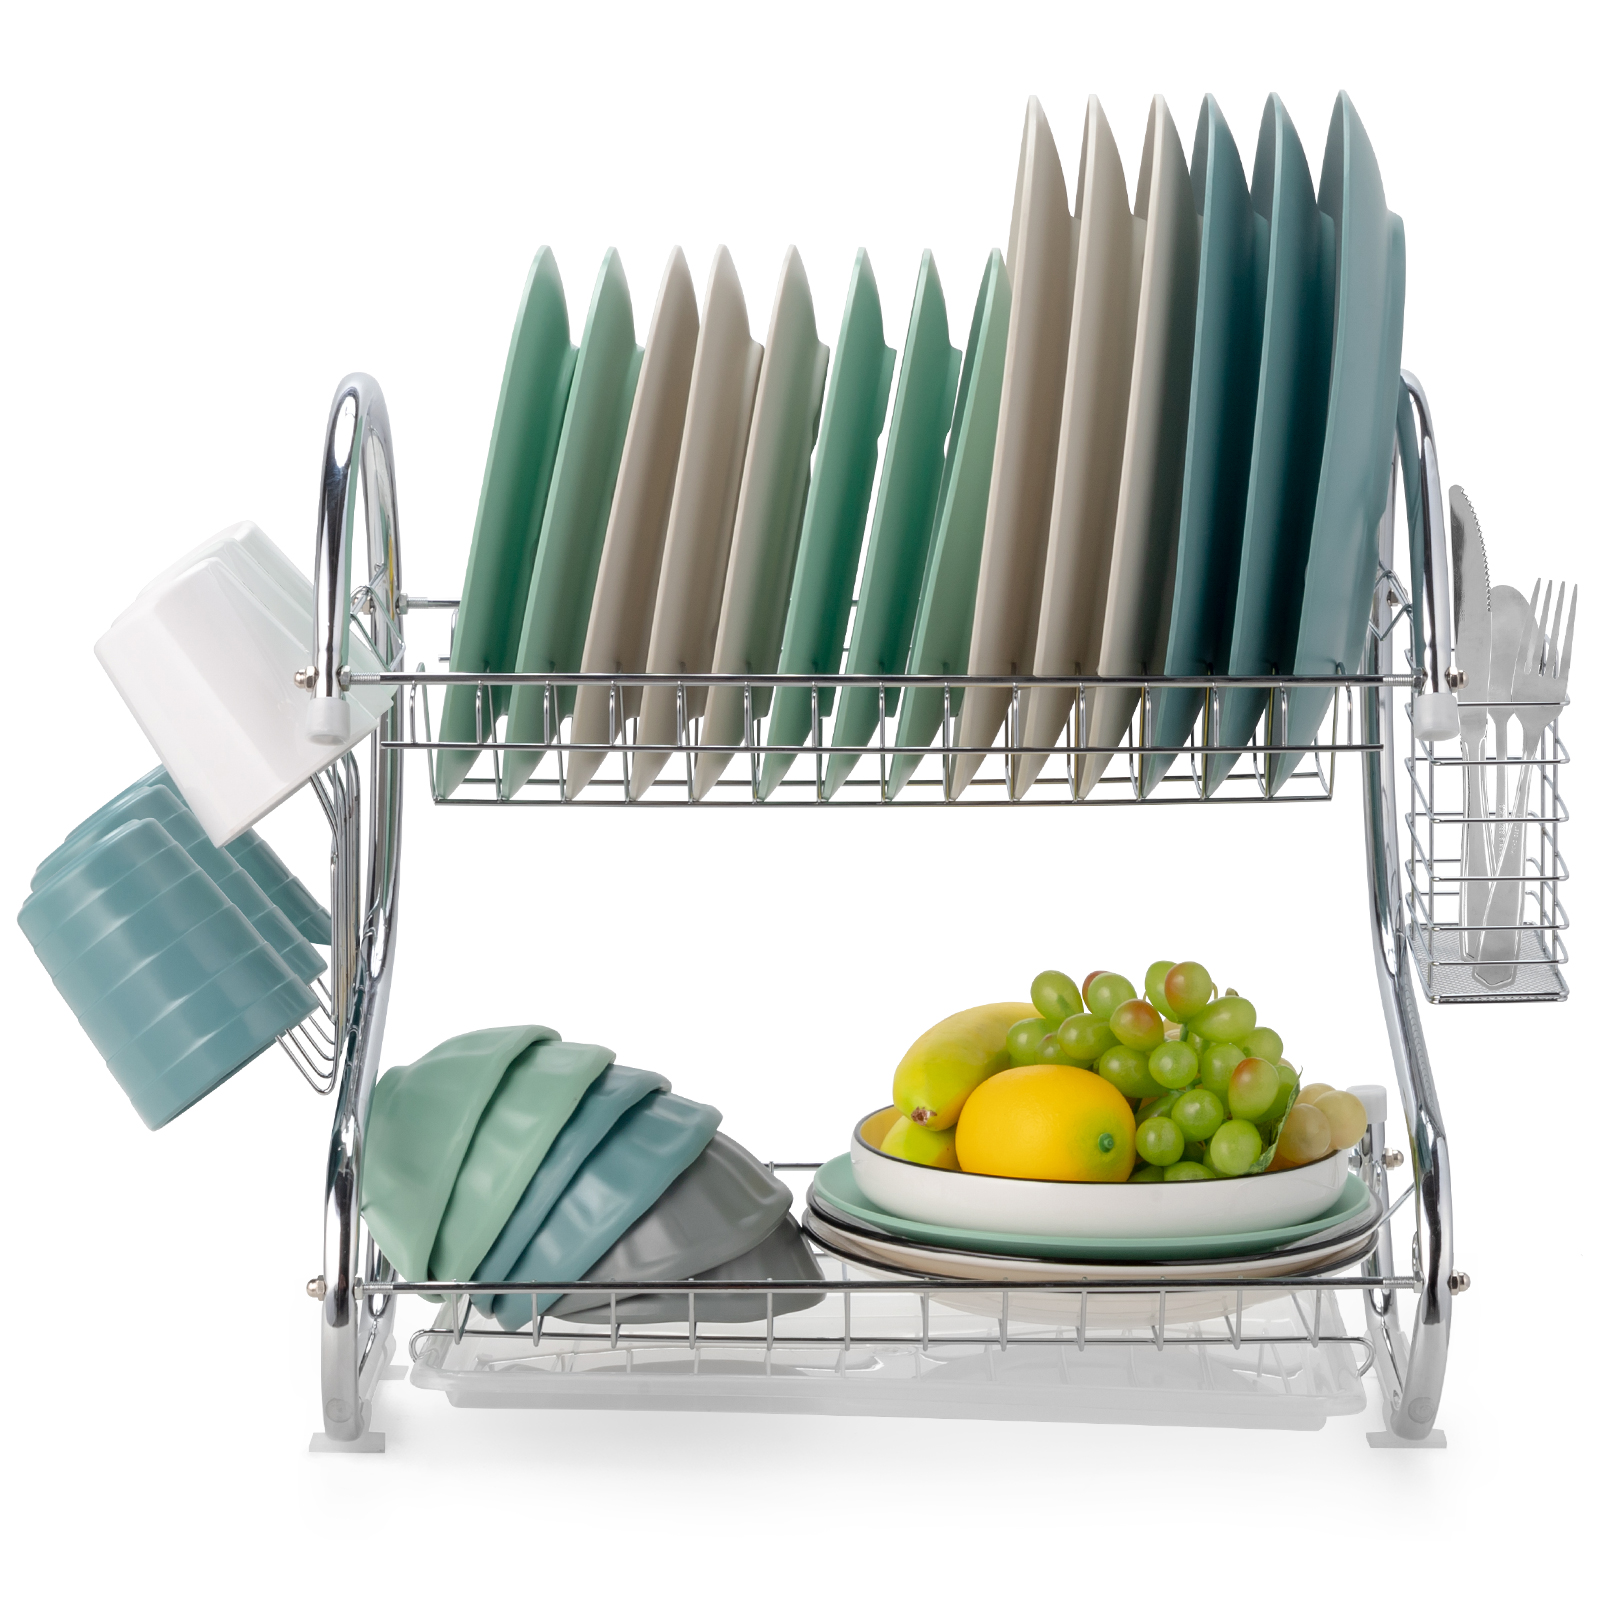 Ktaxon Kitchen Stainless Steel Dish Cup Drying Rack Holder 2-Tier Dish Rack Sink Drainer - image 3 of 11